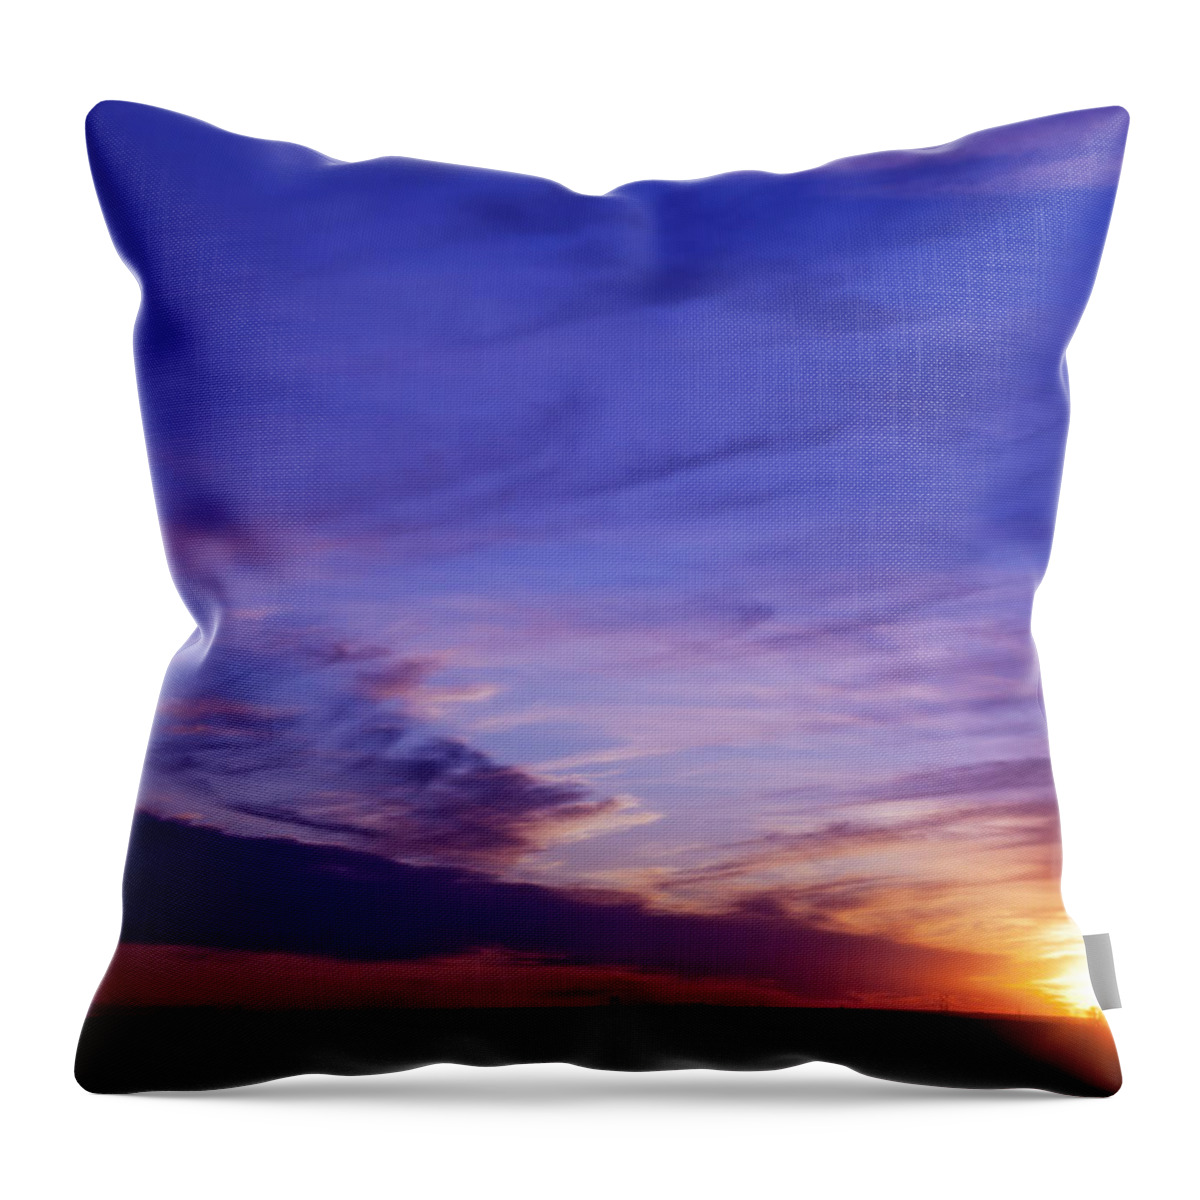 Sunset Throw Pillow featuring the photograph Just before 6 by Toni Hopper